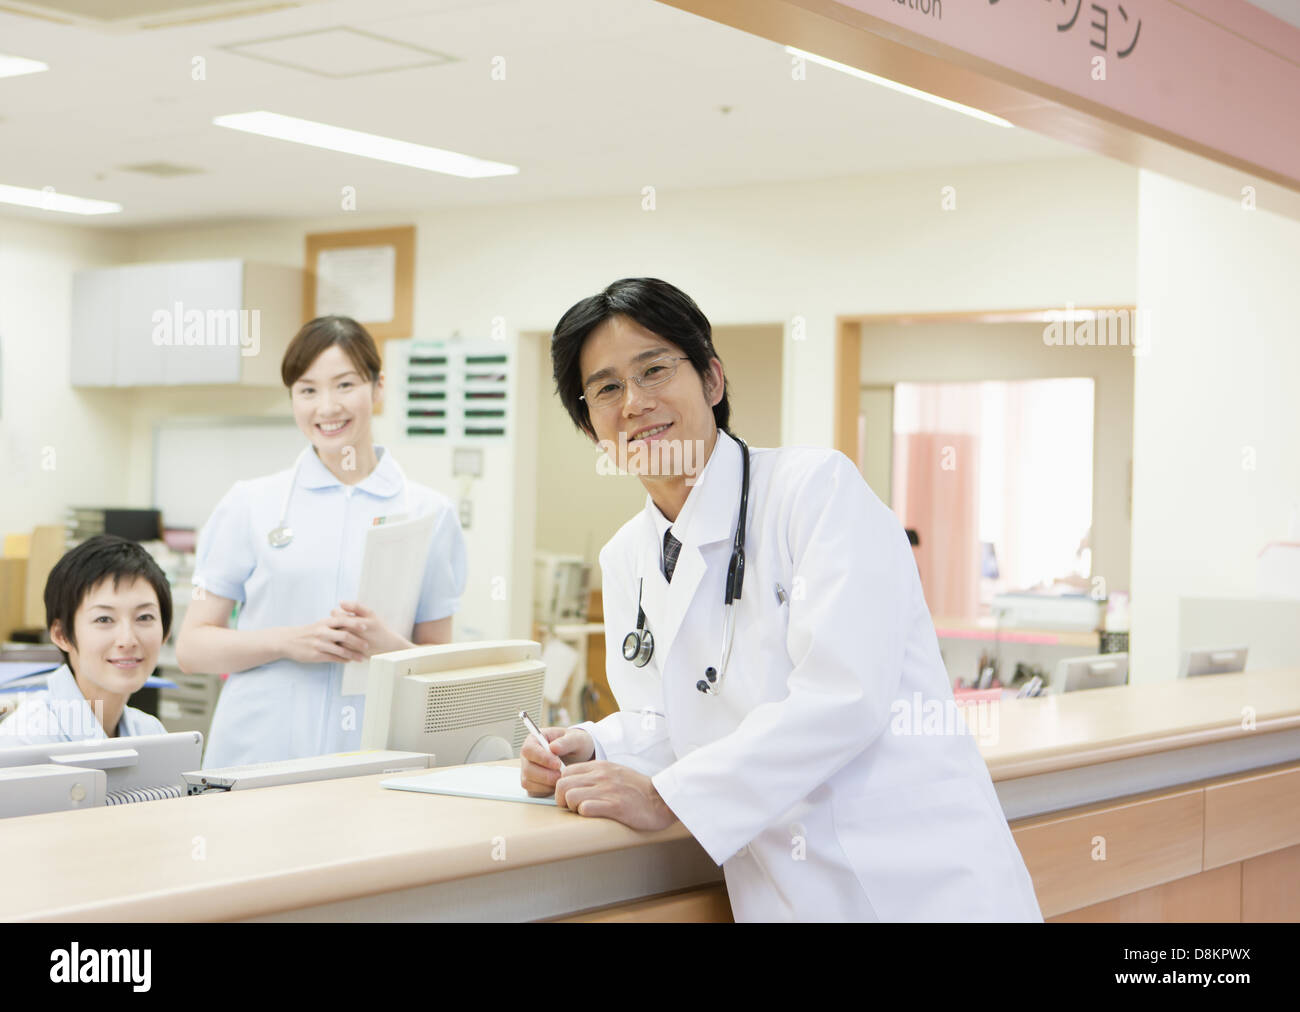 Doctor and nurses smiling Stock Photo